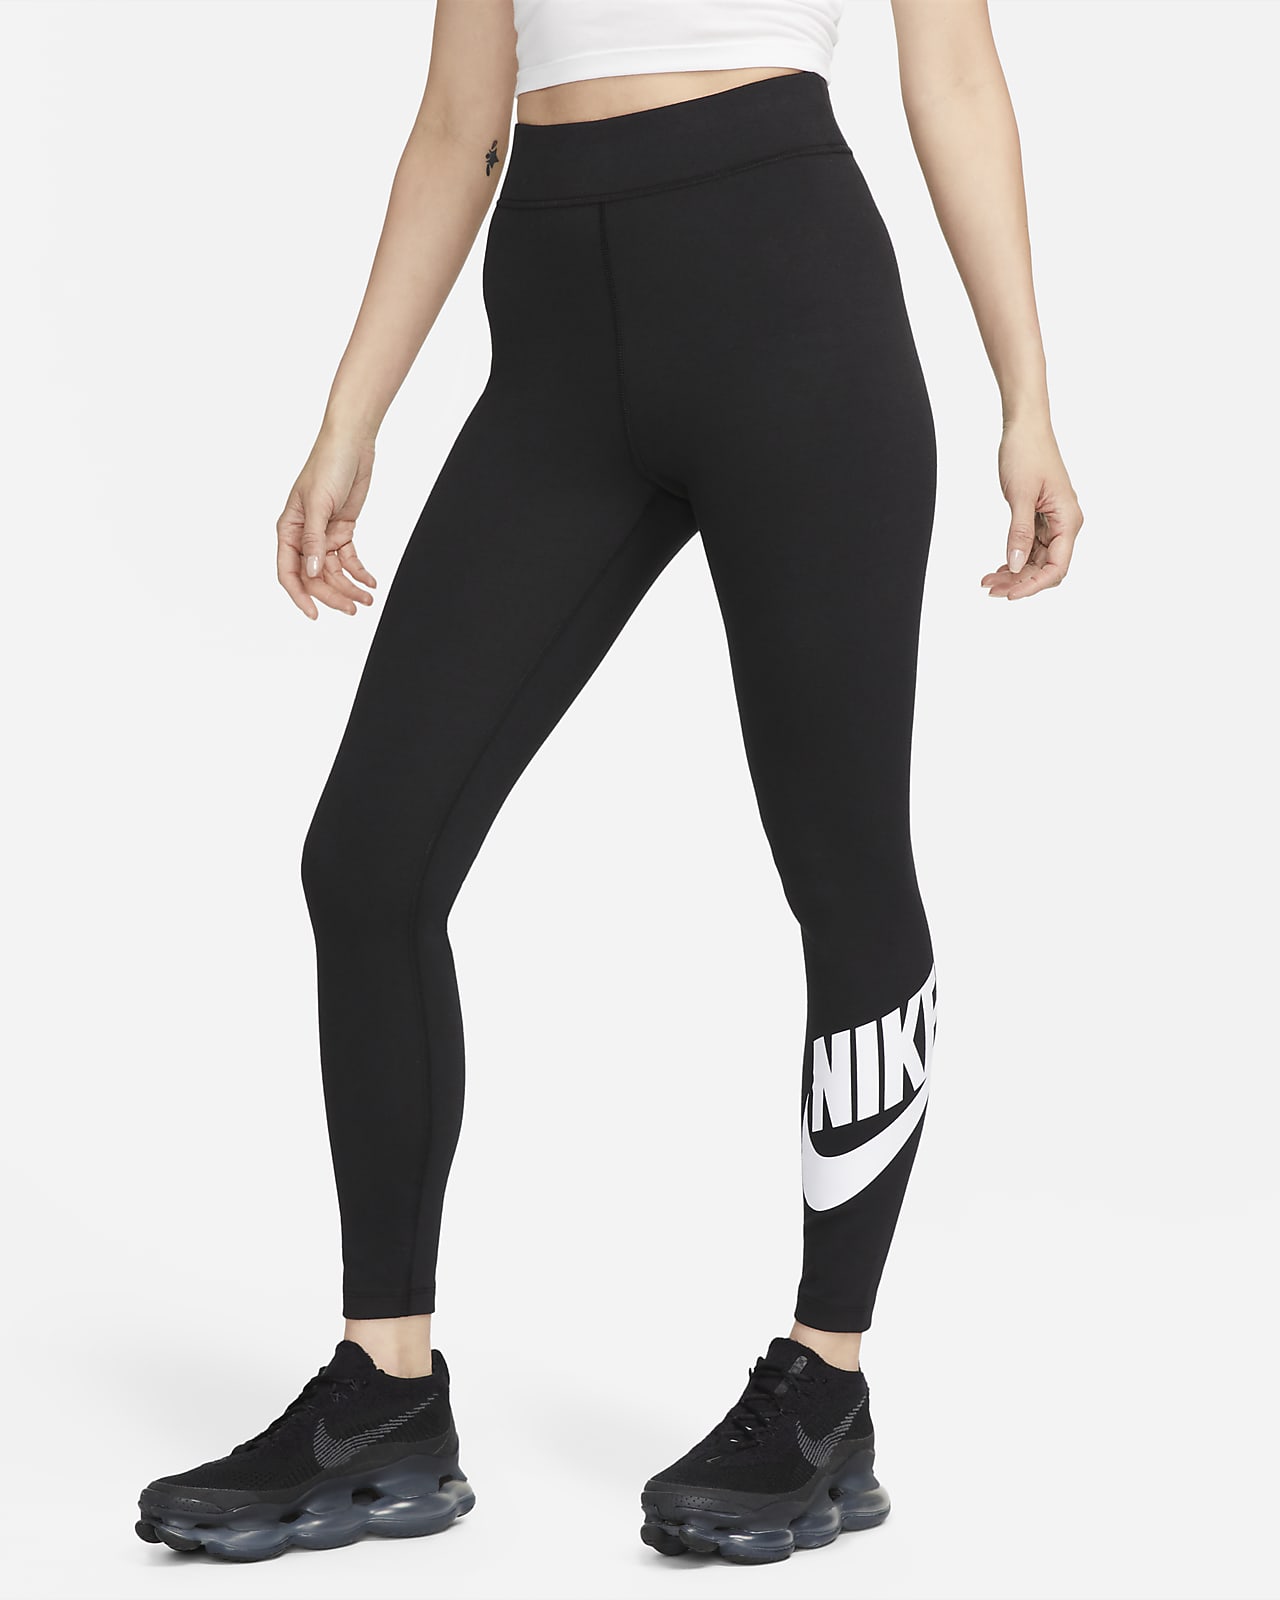 WOMEN'S DRI-FIT RUN DIVISION MIDRISE TIGHT CLEARANCE | Performance Running  Outfitters